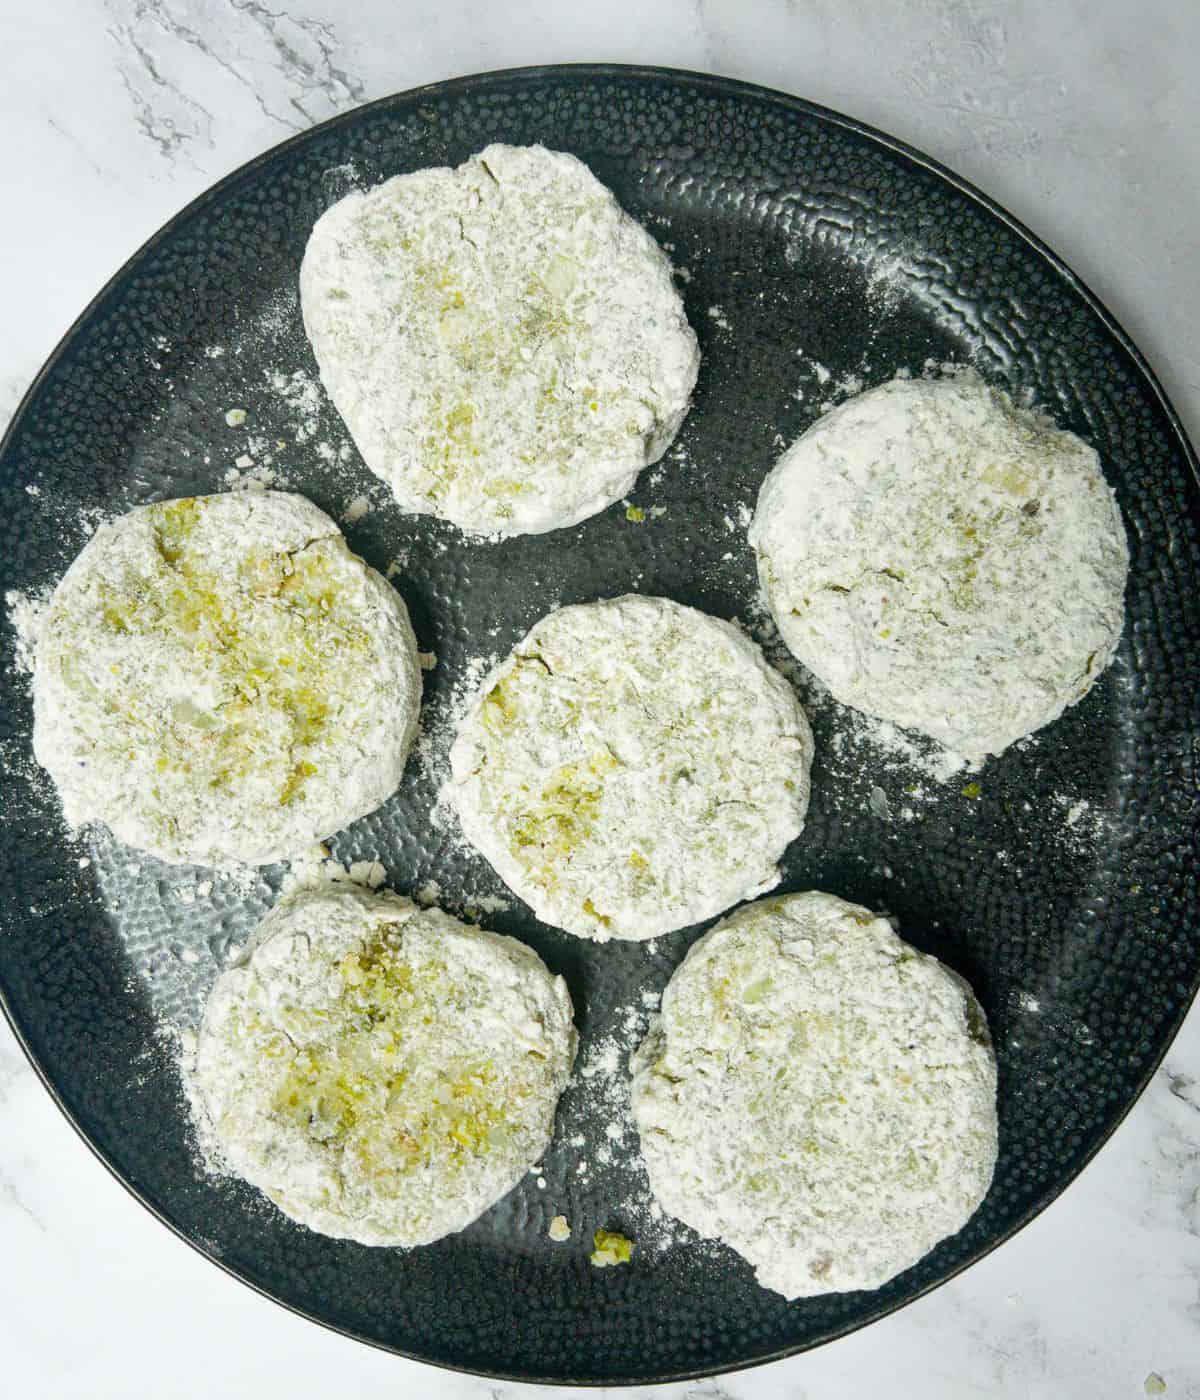 Bubble & squeak patties uncooked, coated in flour on a plate.